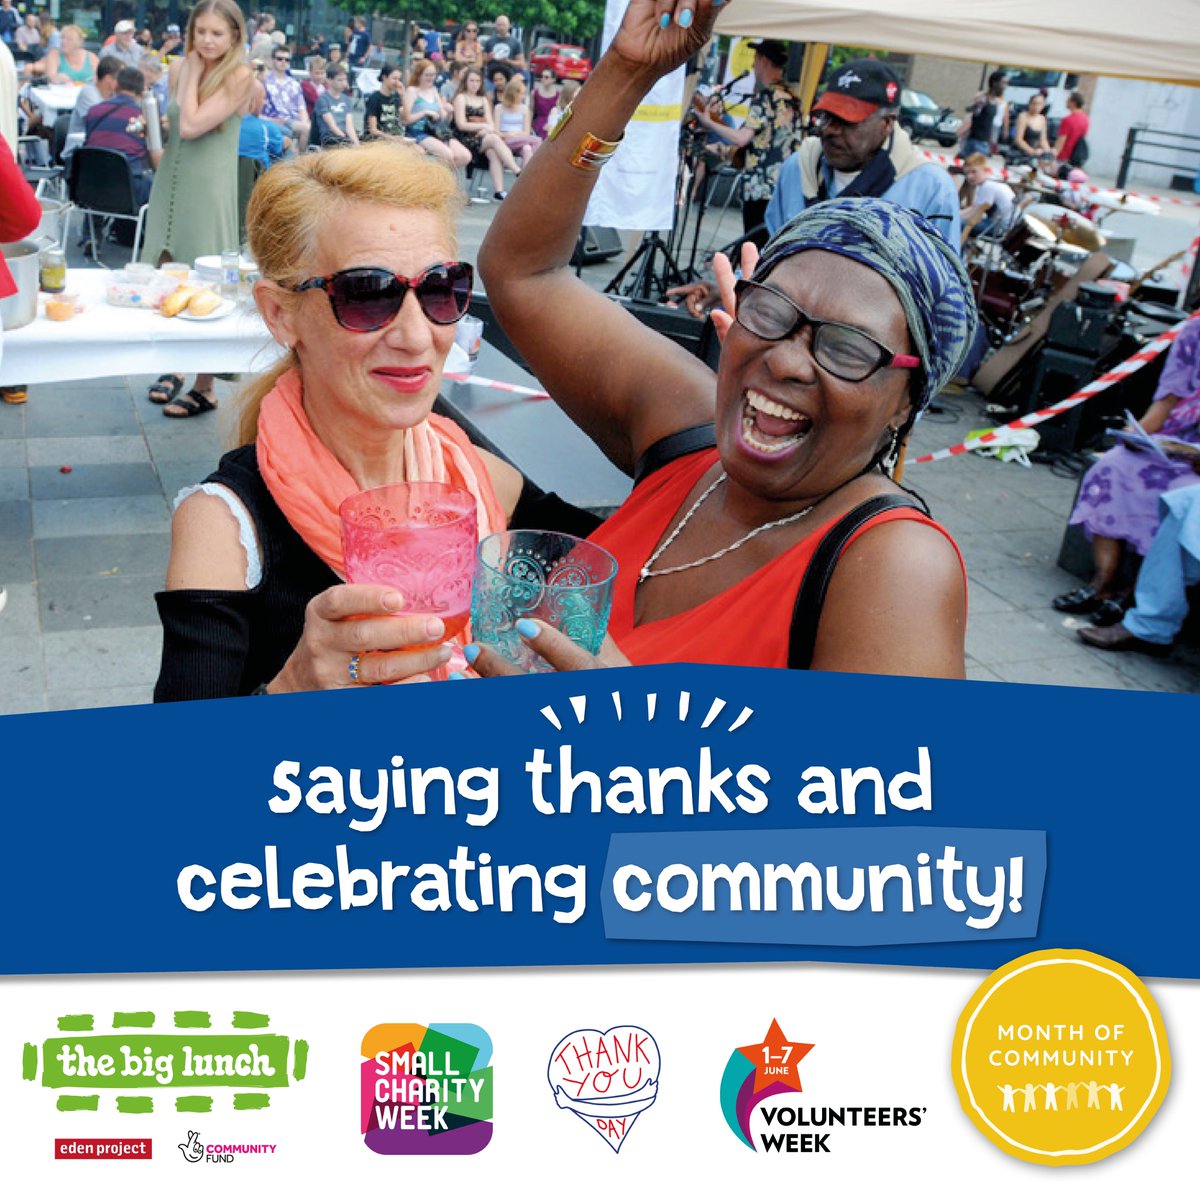 Today marks The Month of Community! Millions of people took part last year to celebrate community heroes, such as @NCVOvolunteers, @CarersWeek, @TheCCoalition, @marmaladetrust, @75Windrush, @great_together, @SmallCharityWeek and us!

#MonthOfCommunity